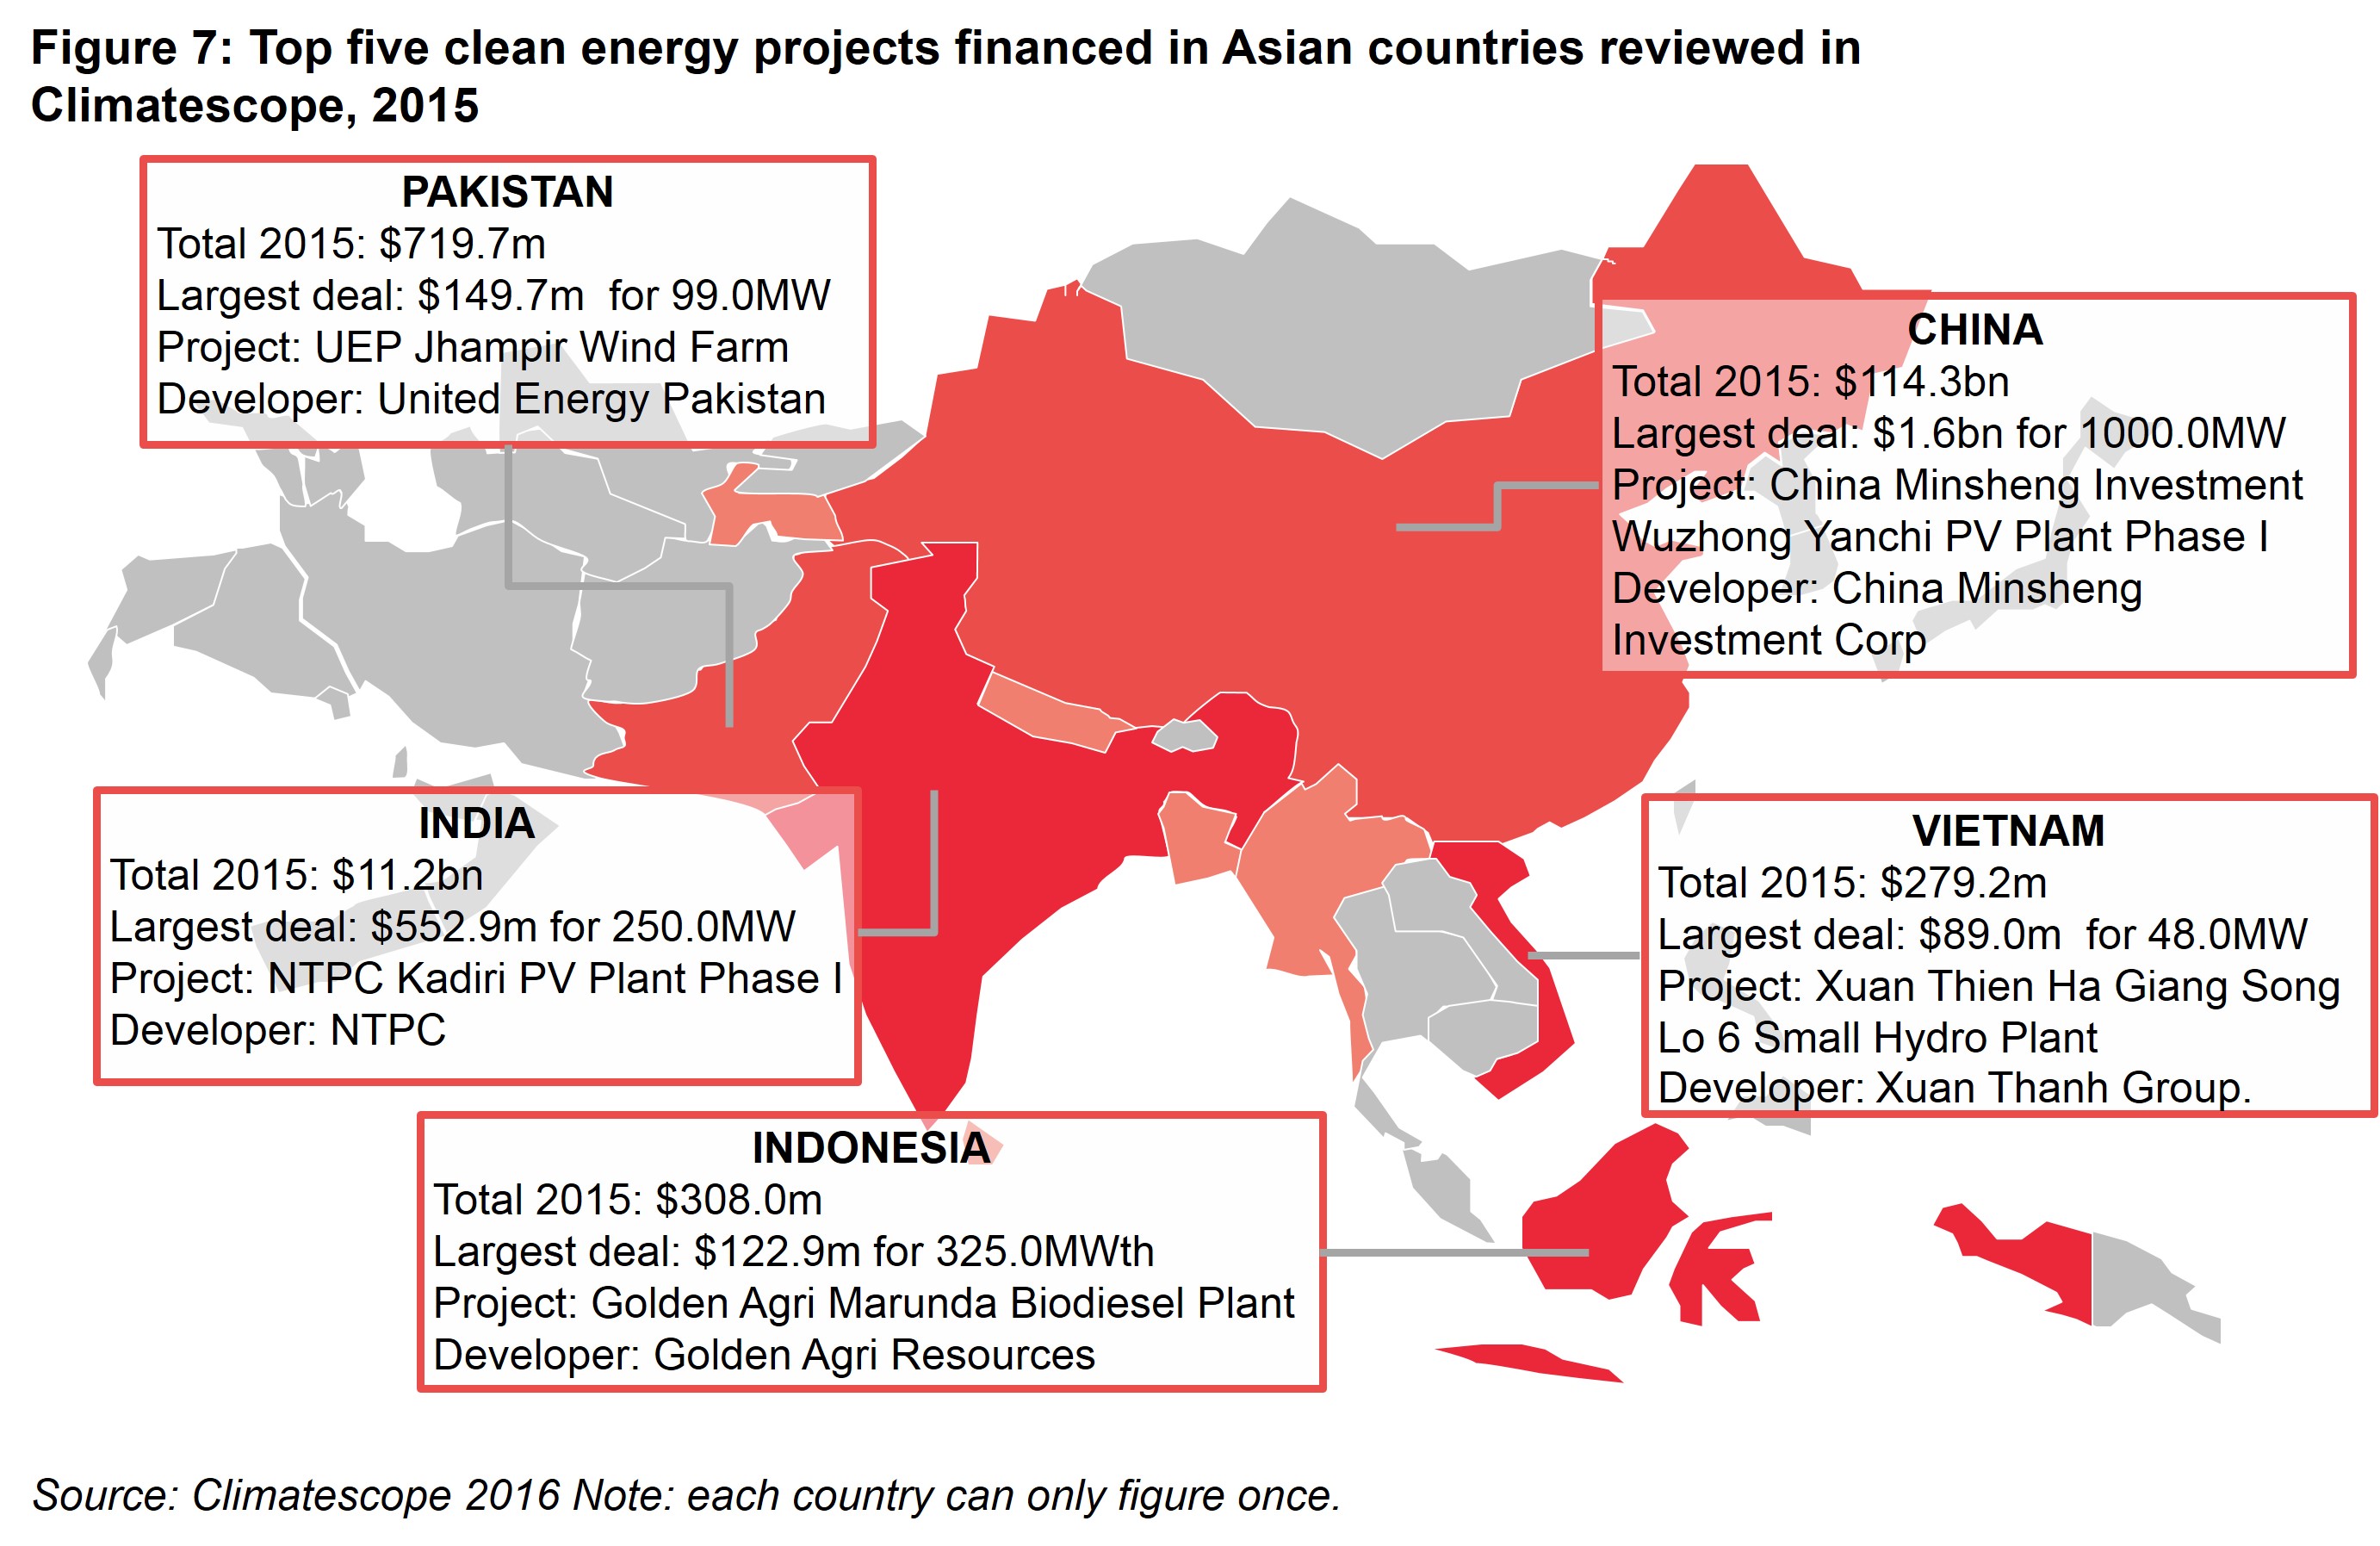 Asia Fig 7 - Top five clean energy projects financed in Asian countries reviewed in Climatescope, 2015